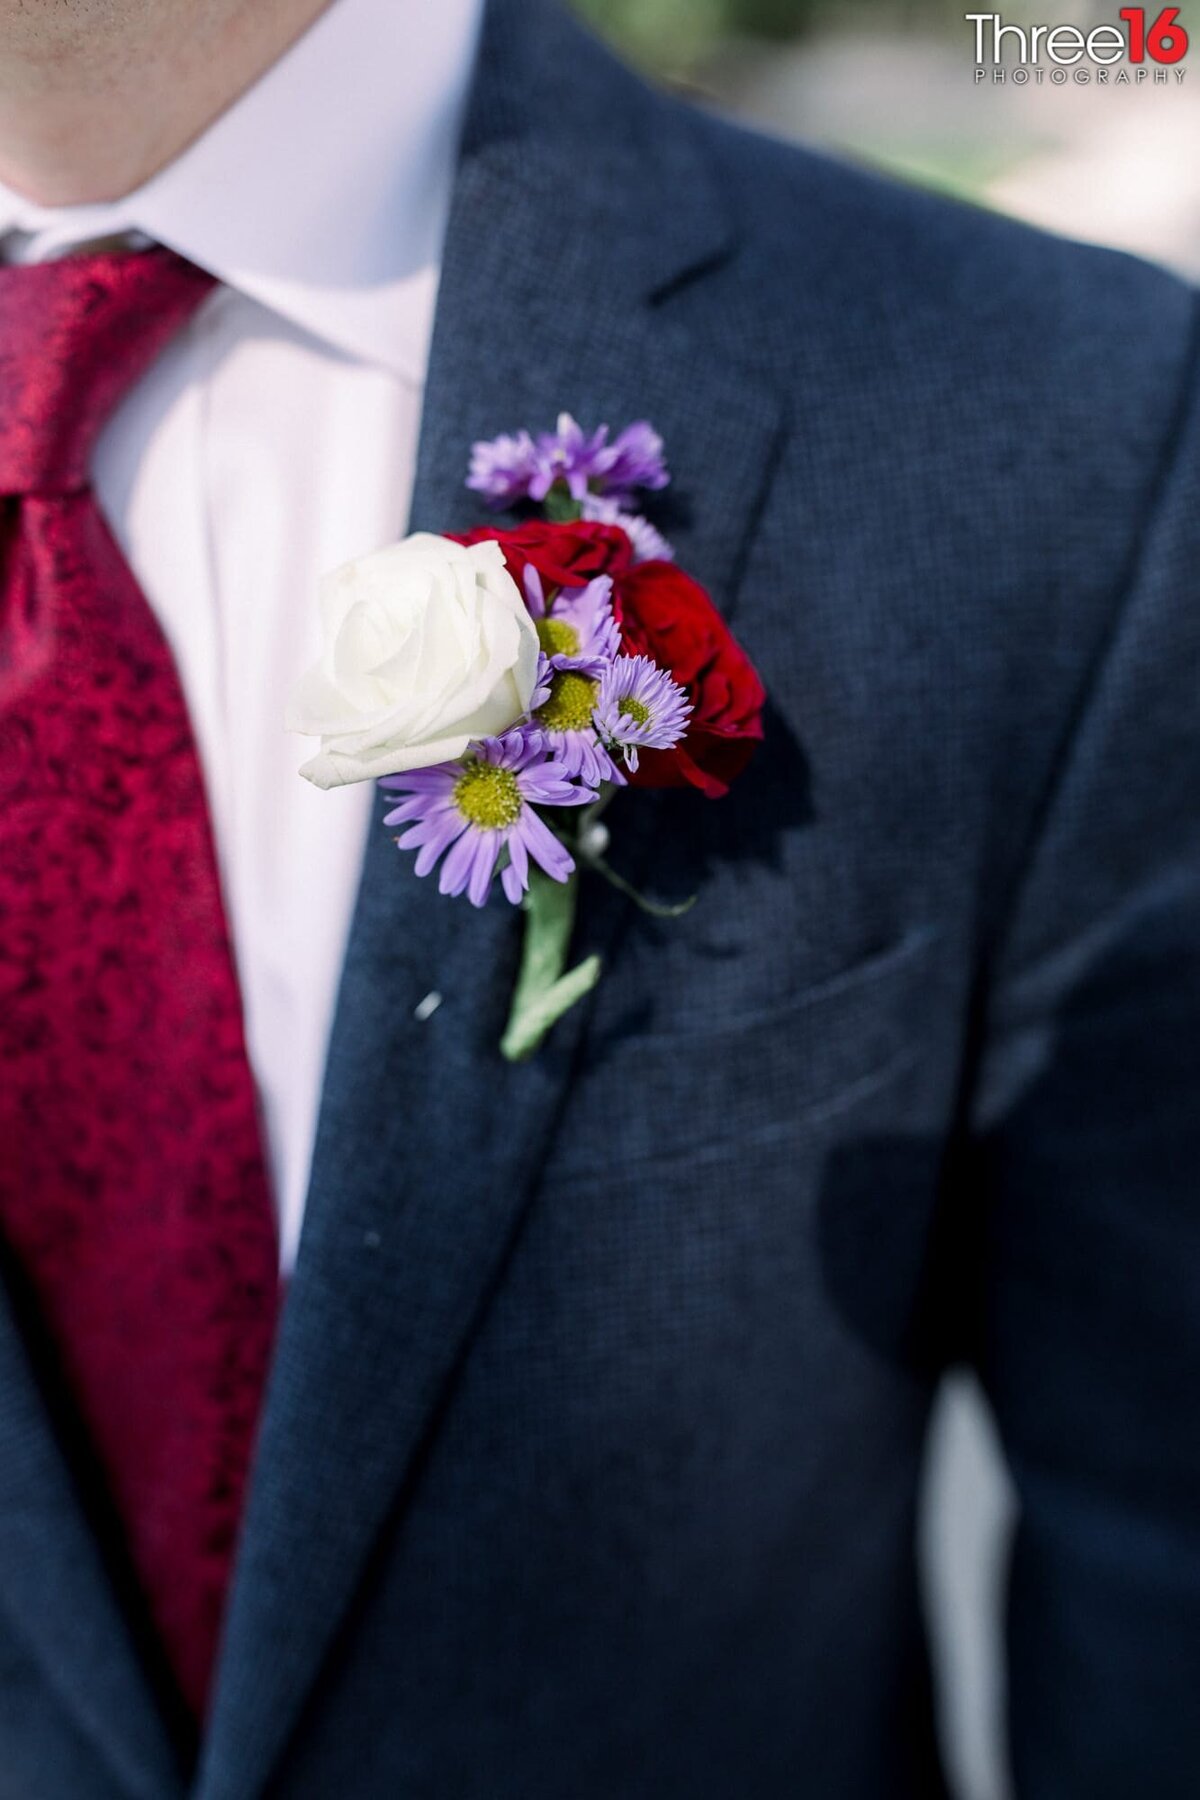 Groom to be's boutonniere